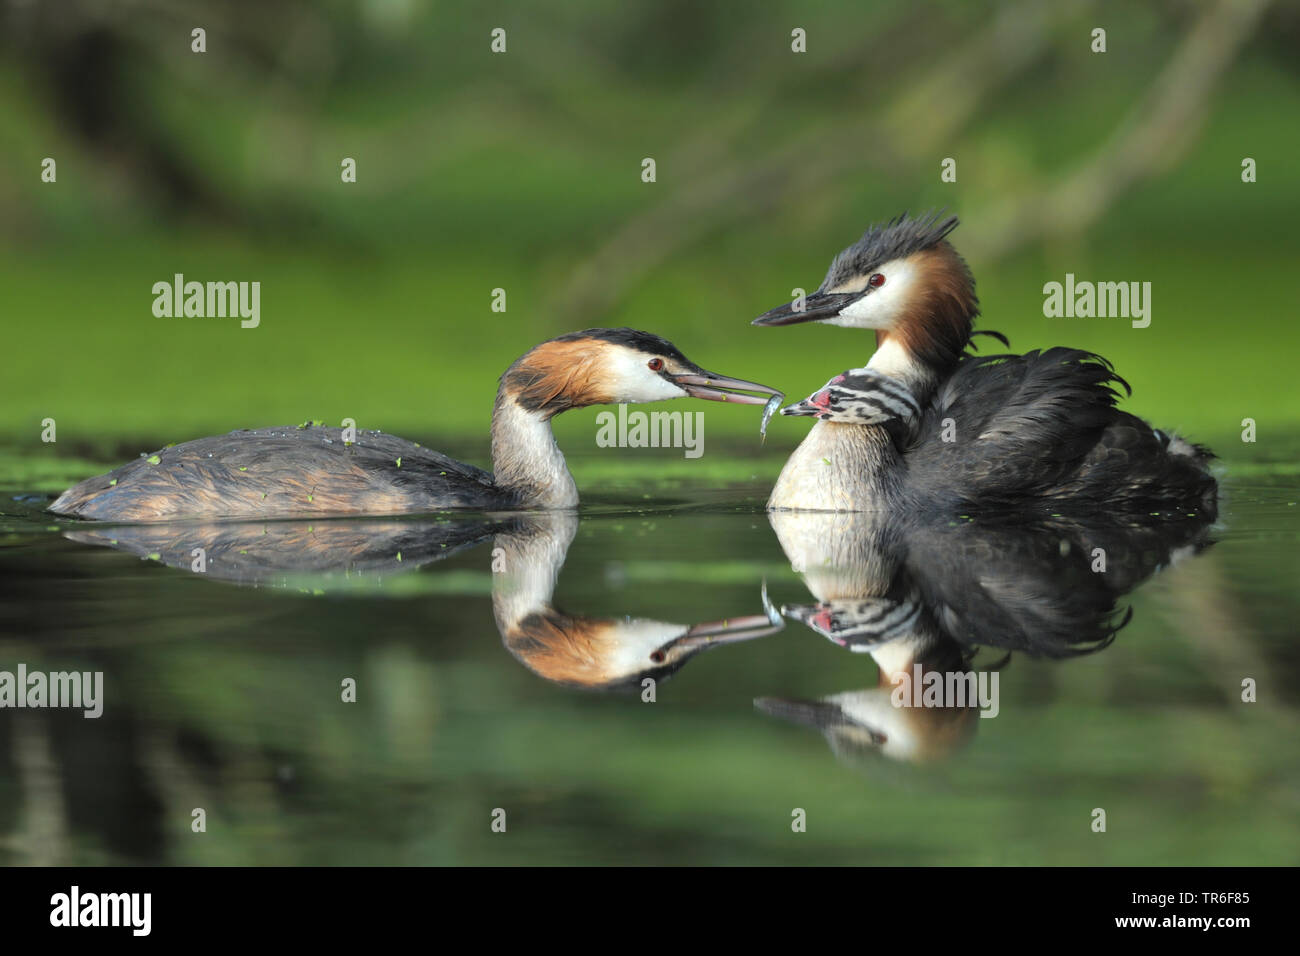 great crested grebe (Podiceps cristatus), swimming animal family, chick on the back is fed, Germany Stock Photo